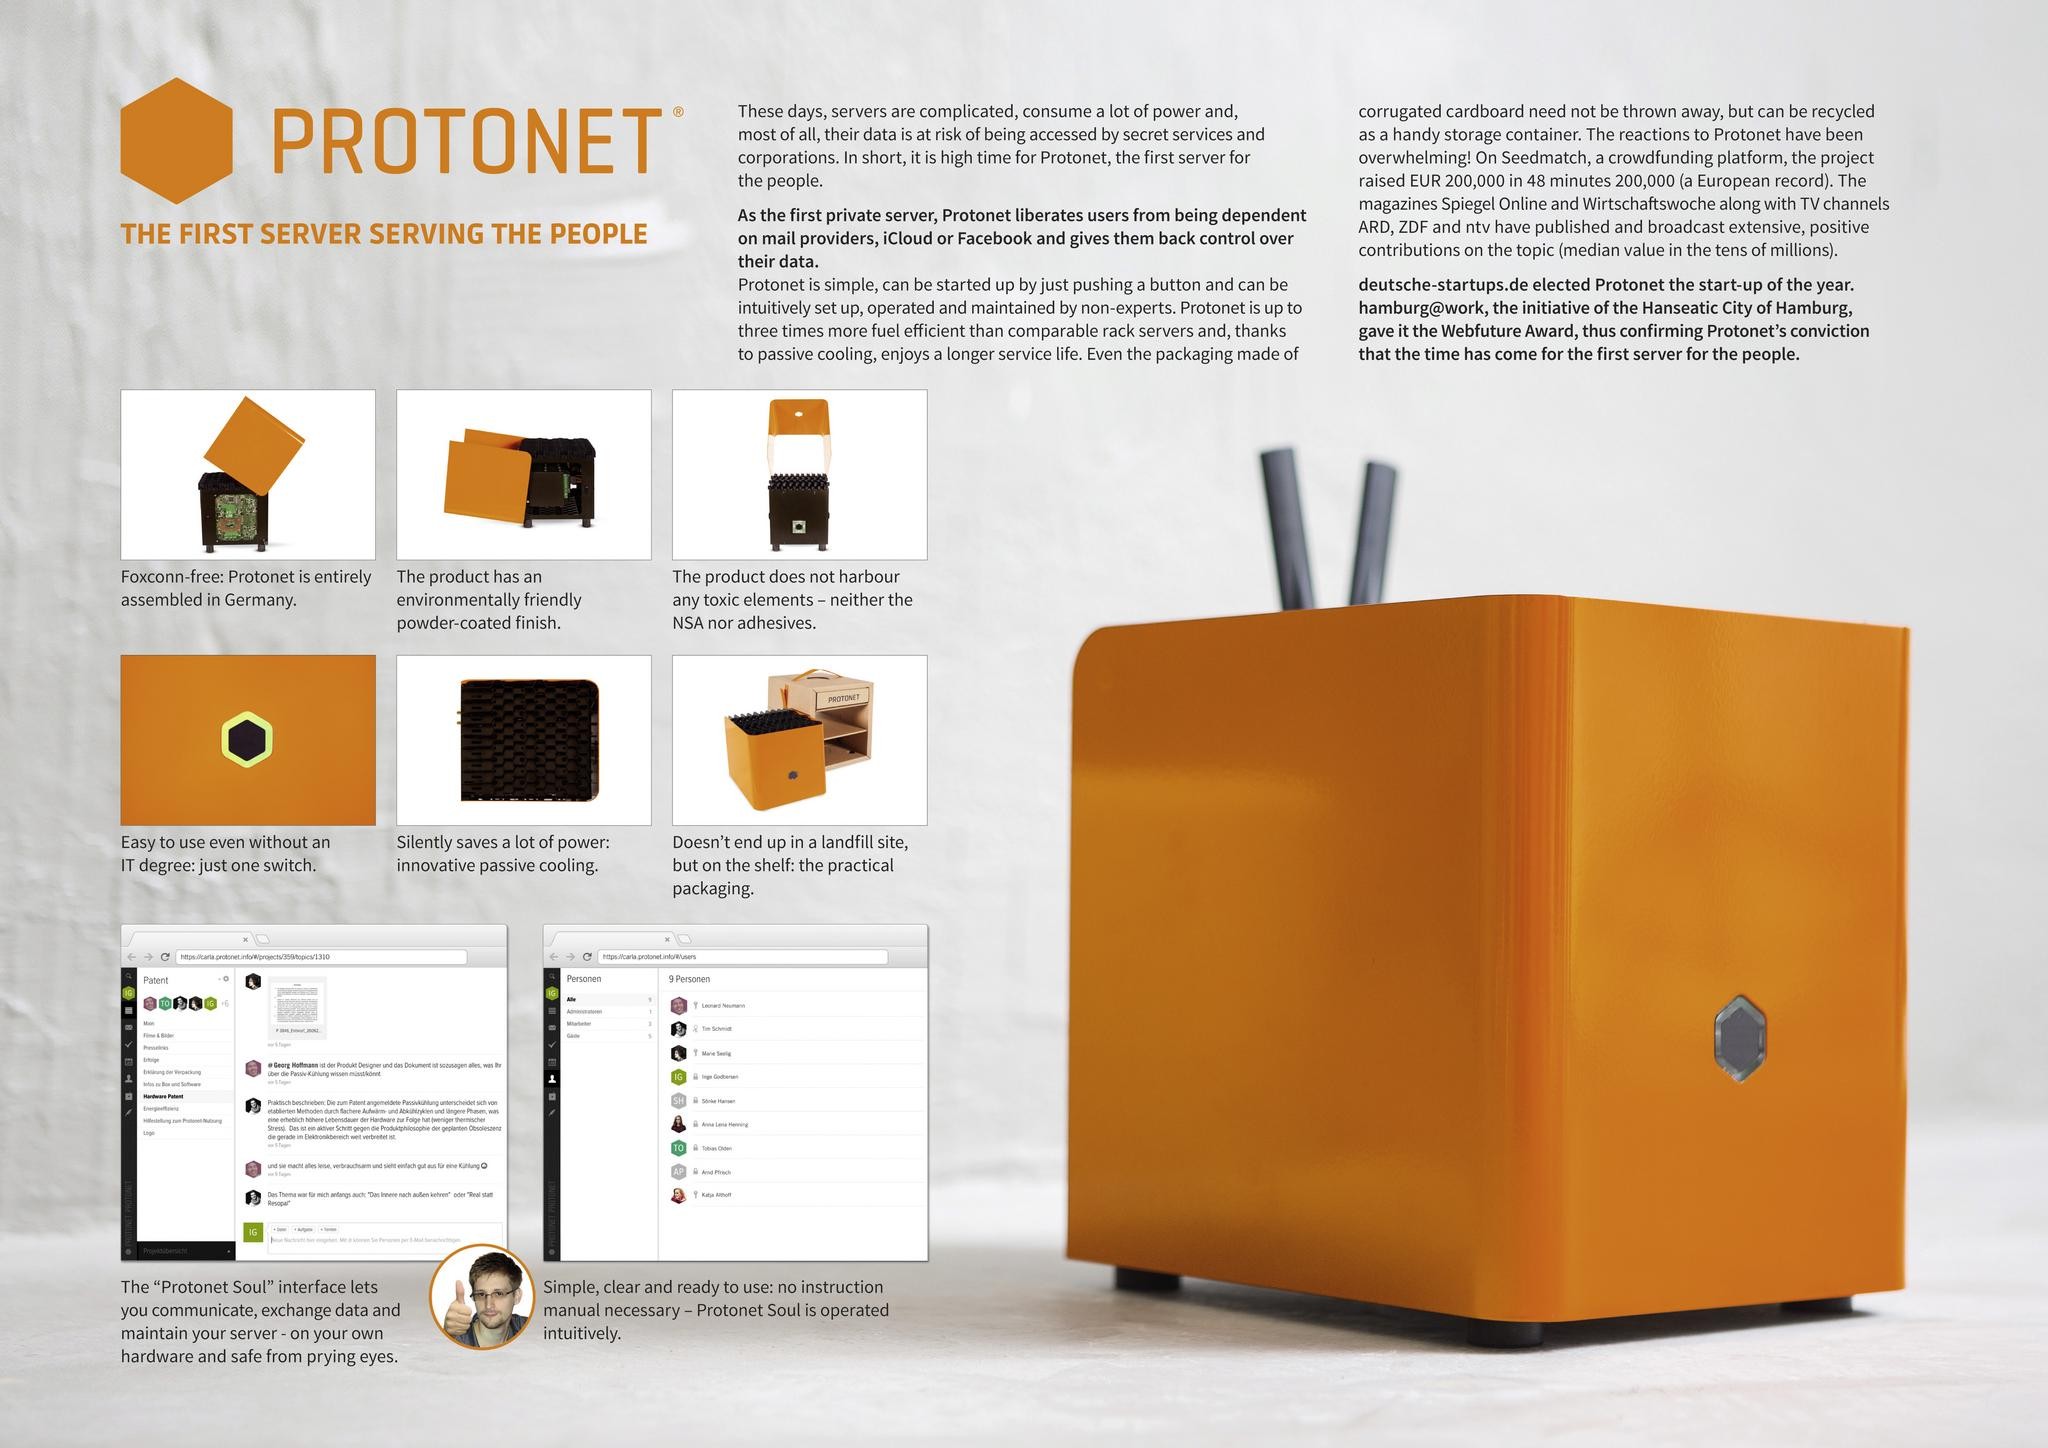 PROTONET - THE FIRST SERVER SERVING THE PEOPLE.